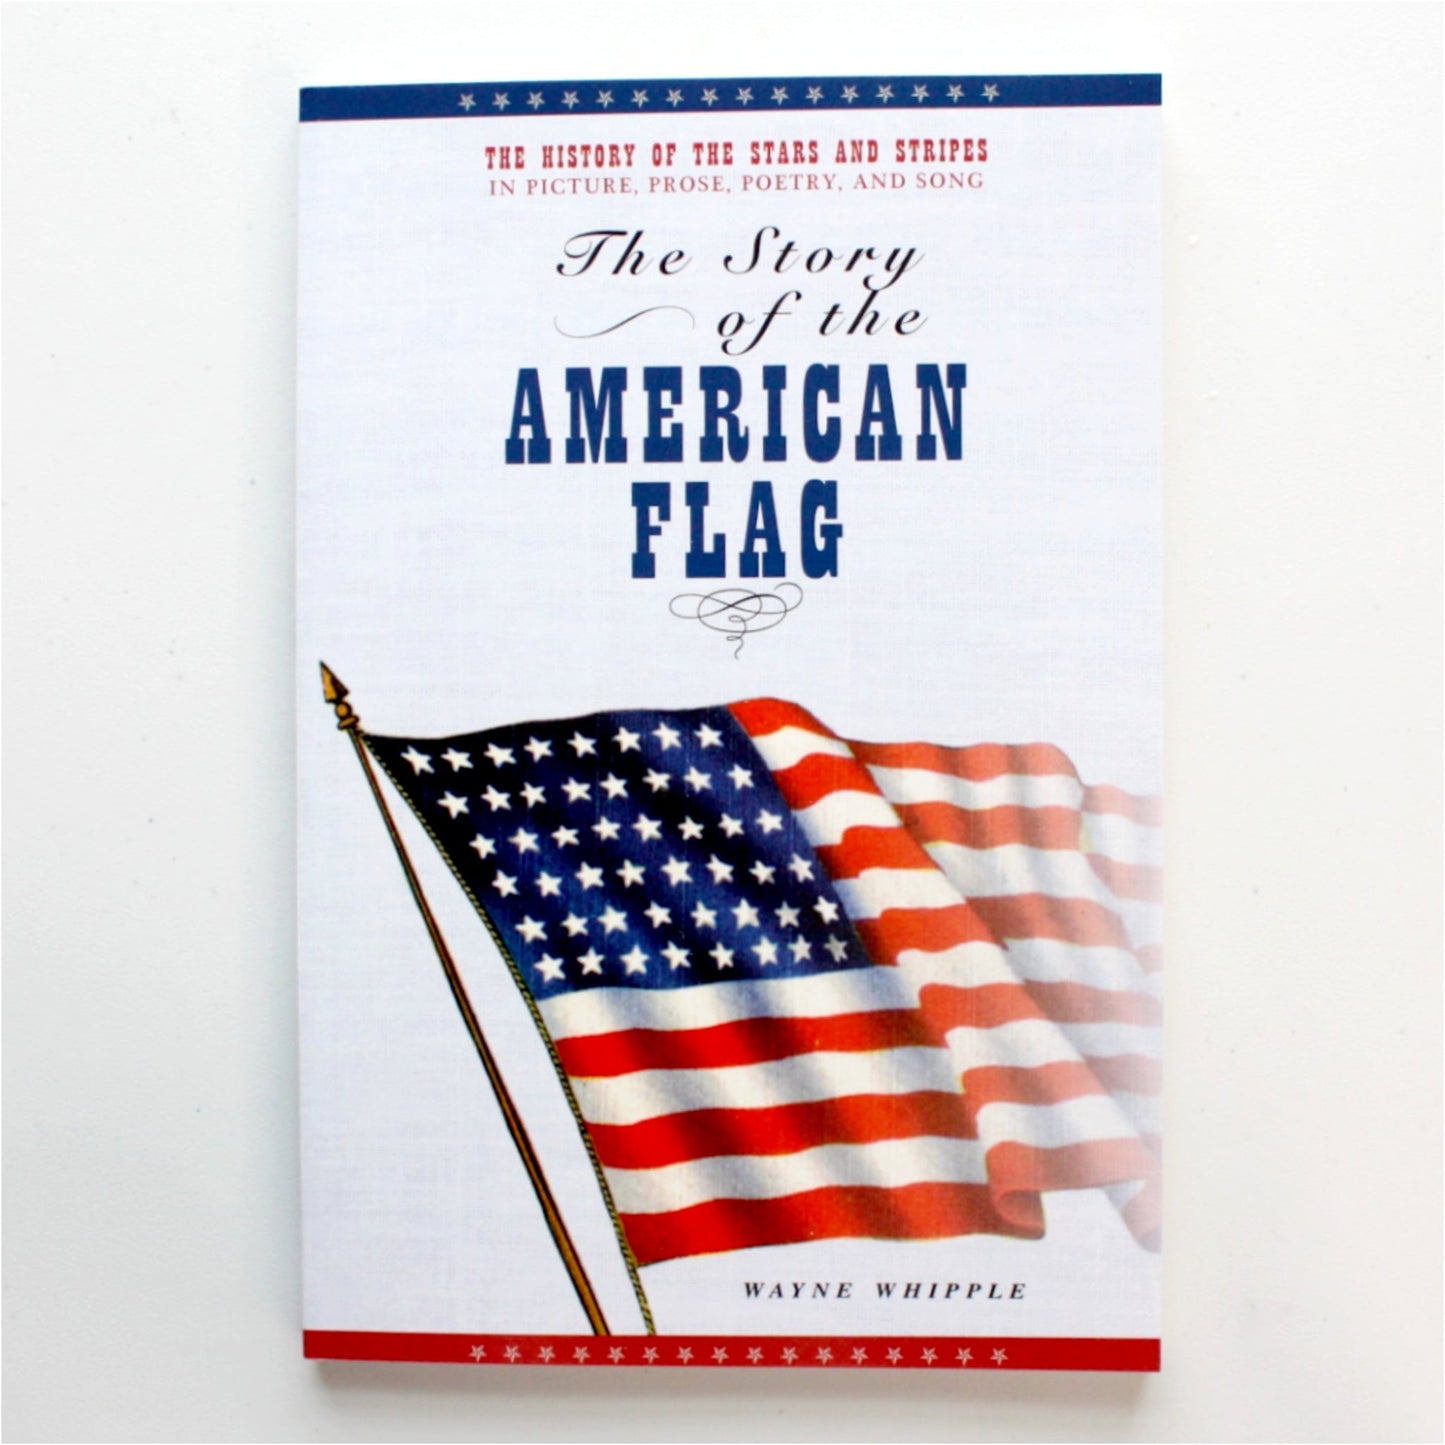 The Story of the American Flag - Made in the USA